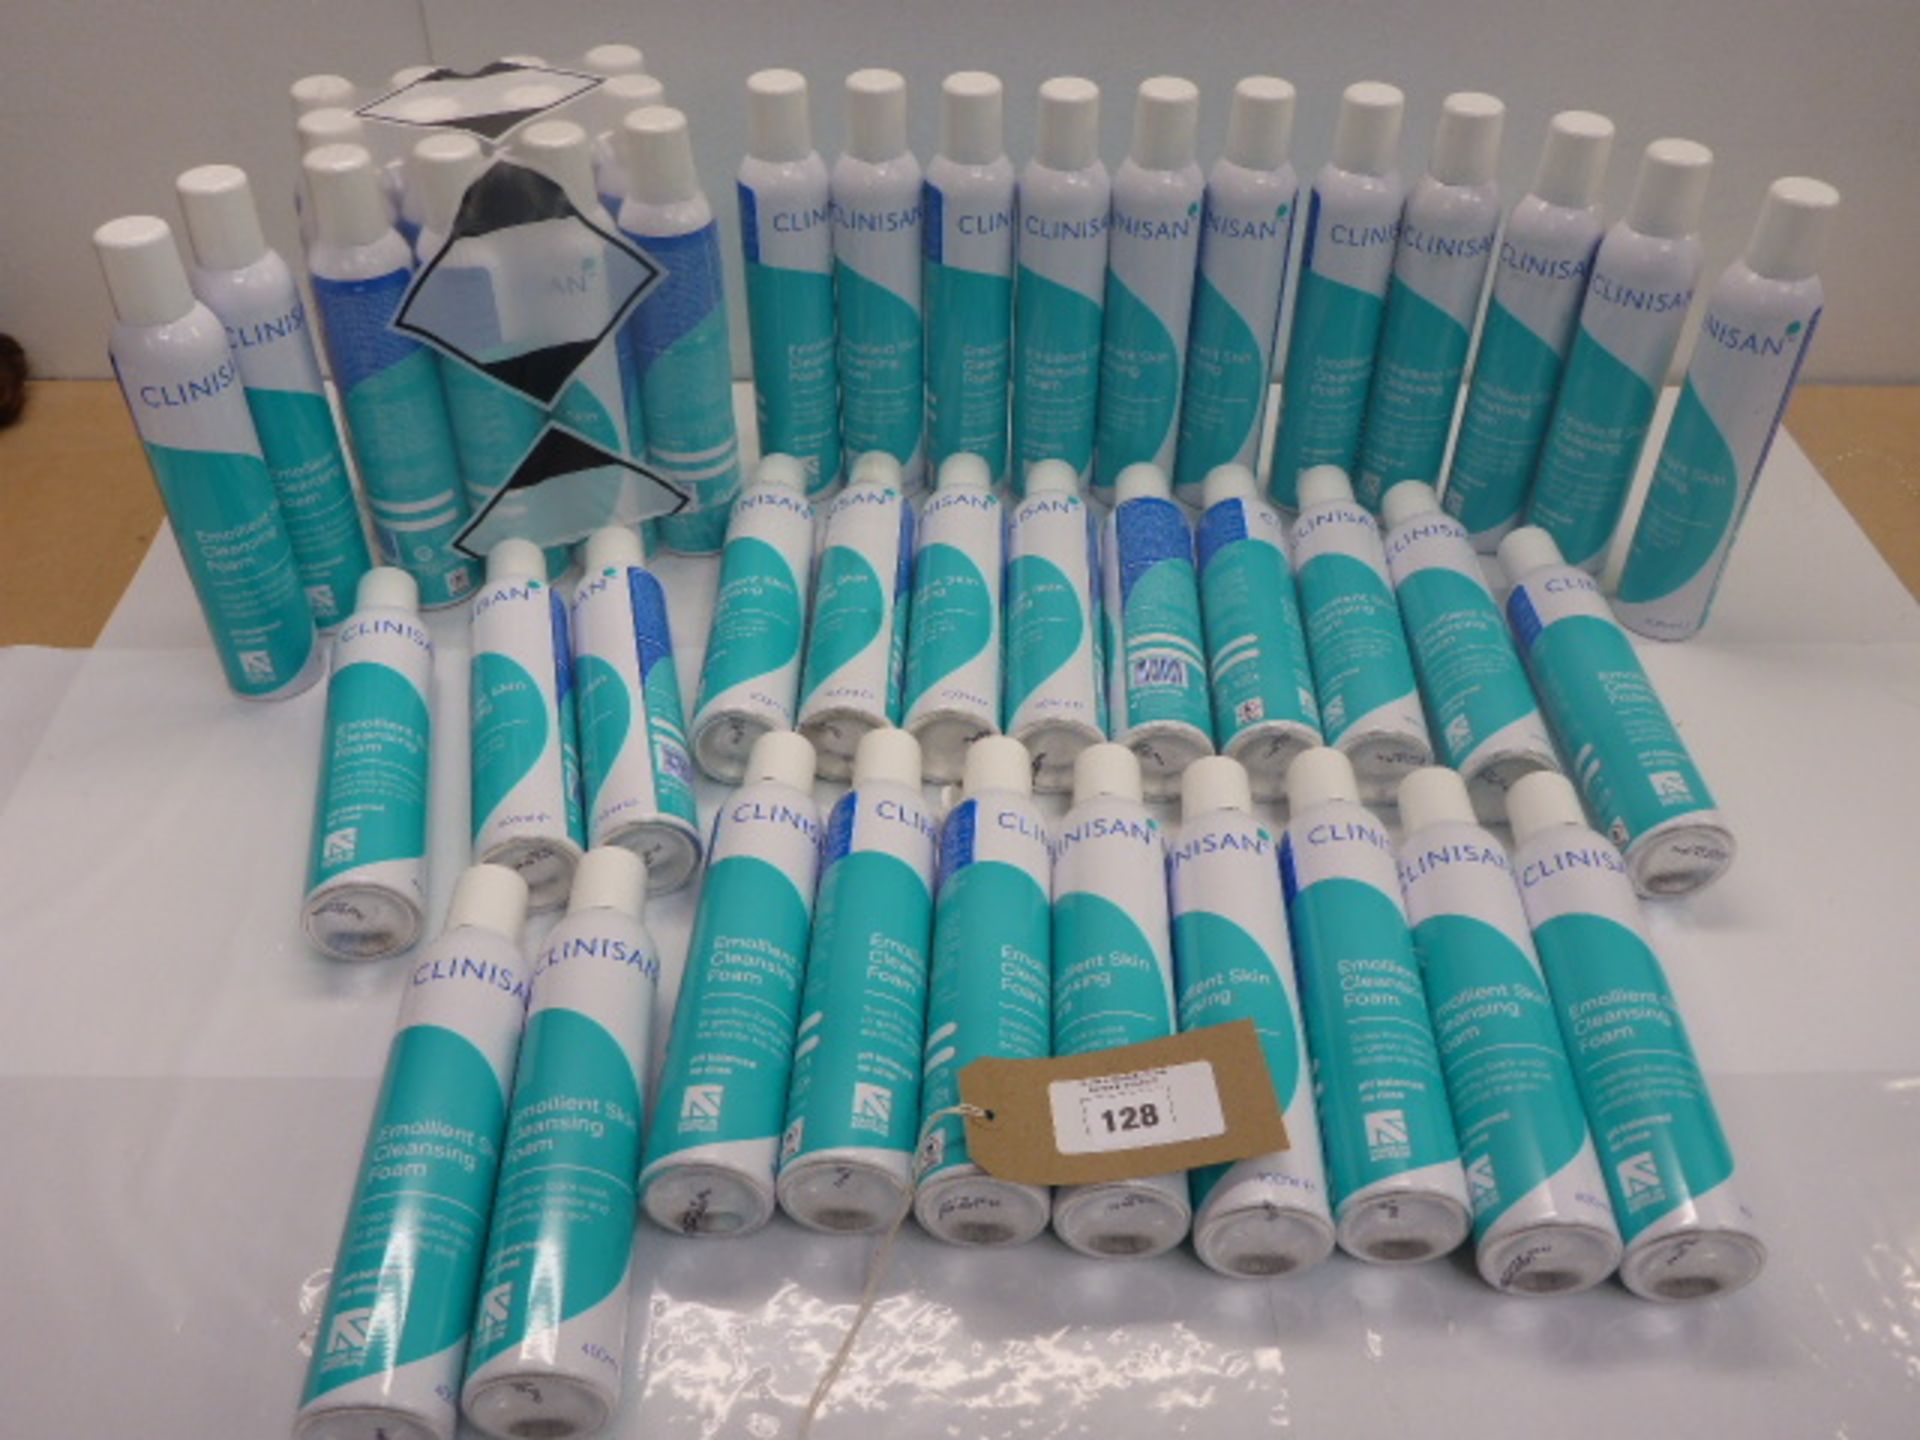 Bag containing 47 cans of Emollient Skin Cleansing foam